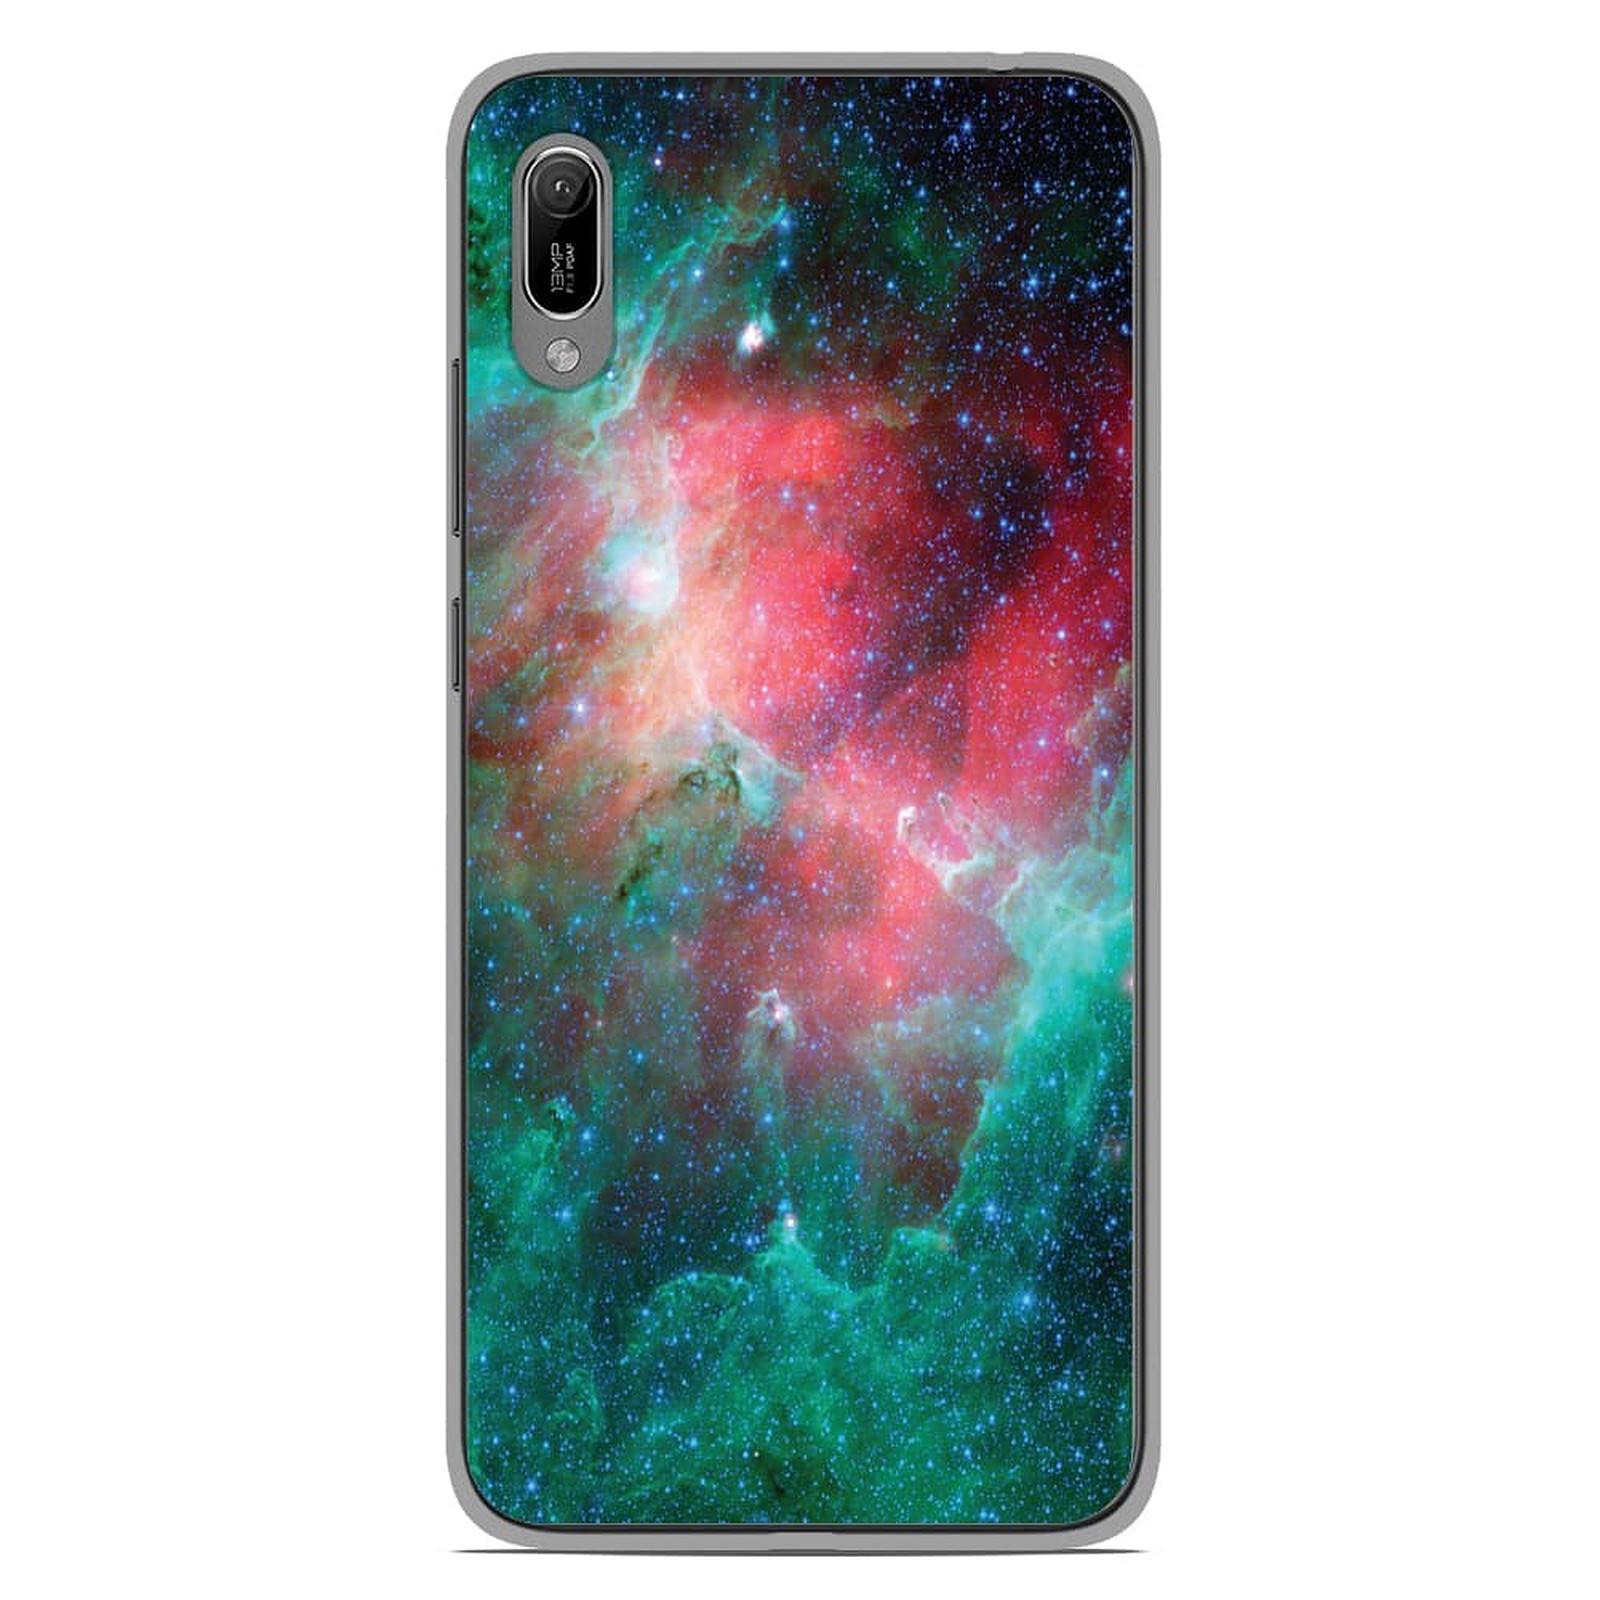 1001 Coques Coque silicone gel Huawei Y6 2019 motif Nebuleuse - Coque telephone 1001Coques